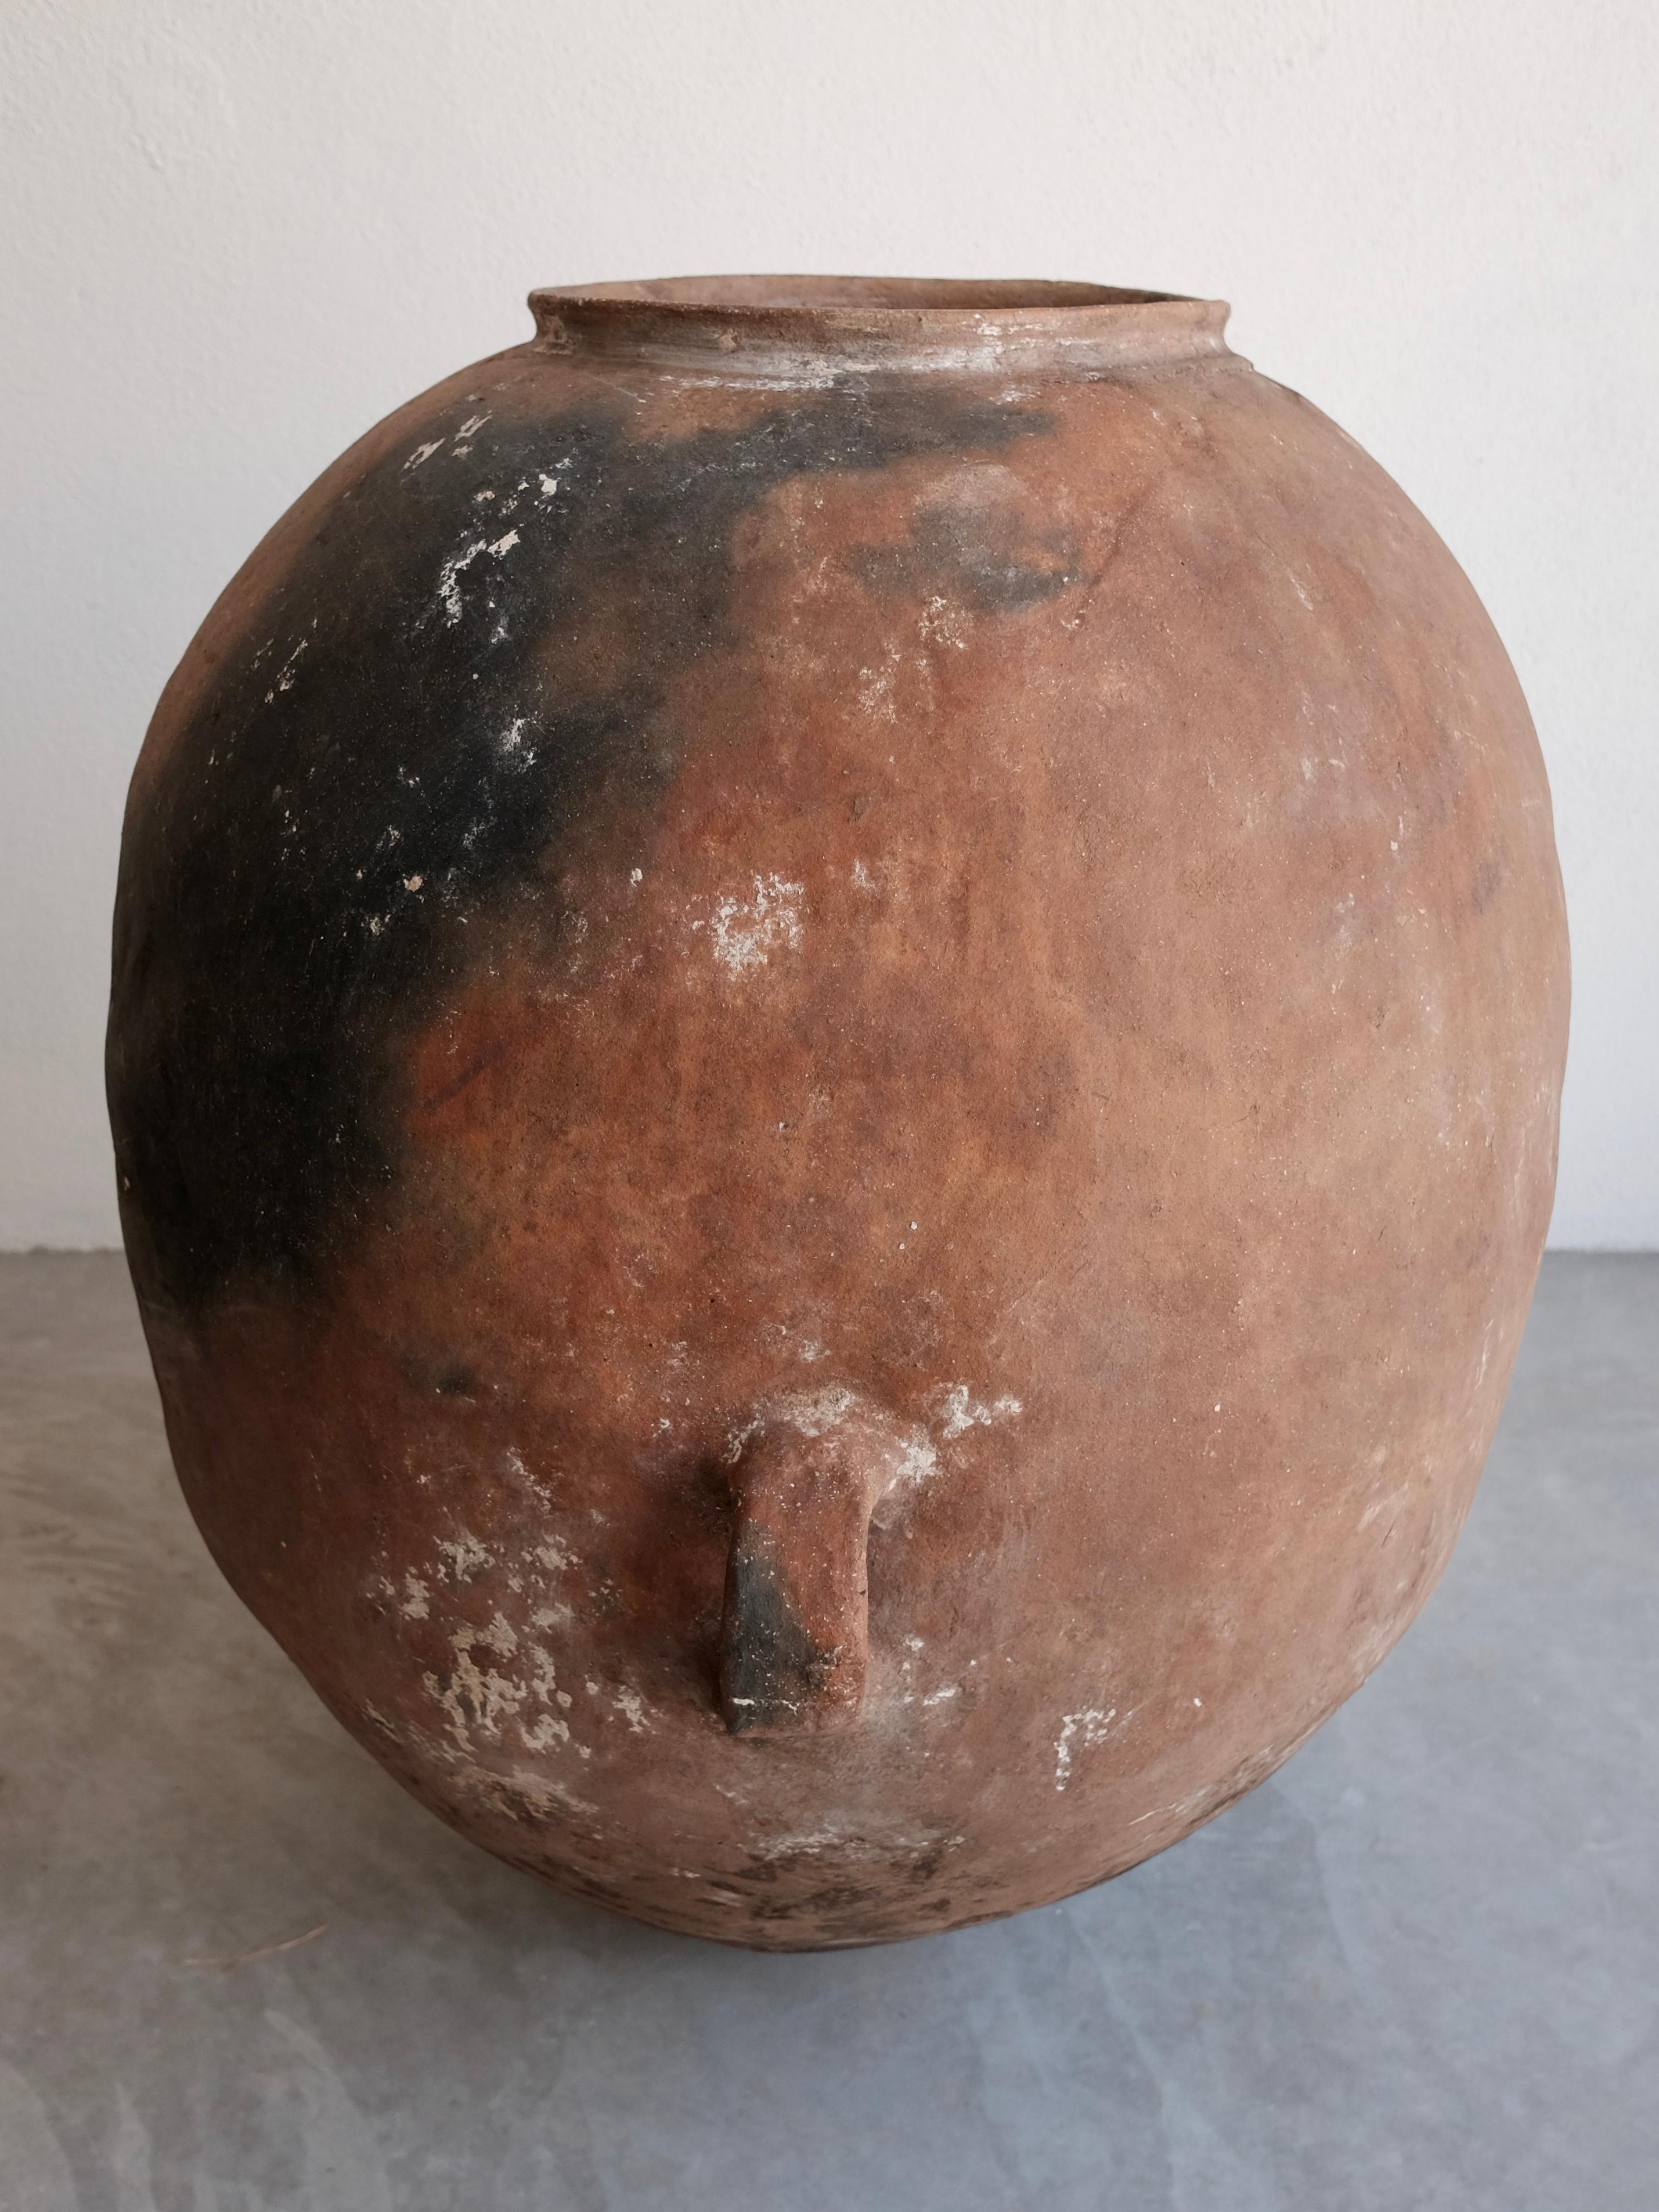 Large terracotta pot from the northern sierras of Puebla used for making Tepache, a customary fermented pineapple beverage. Rare piece.